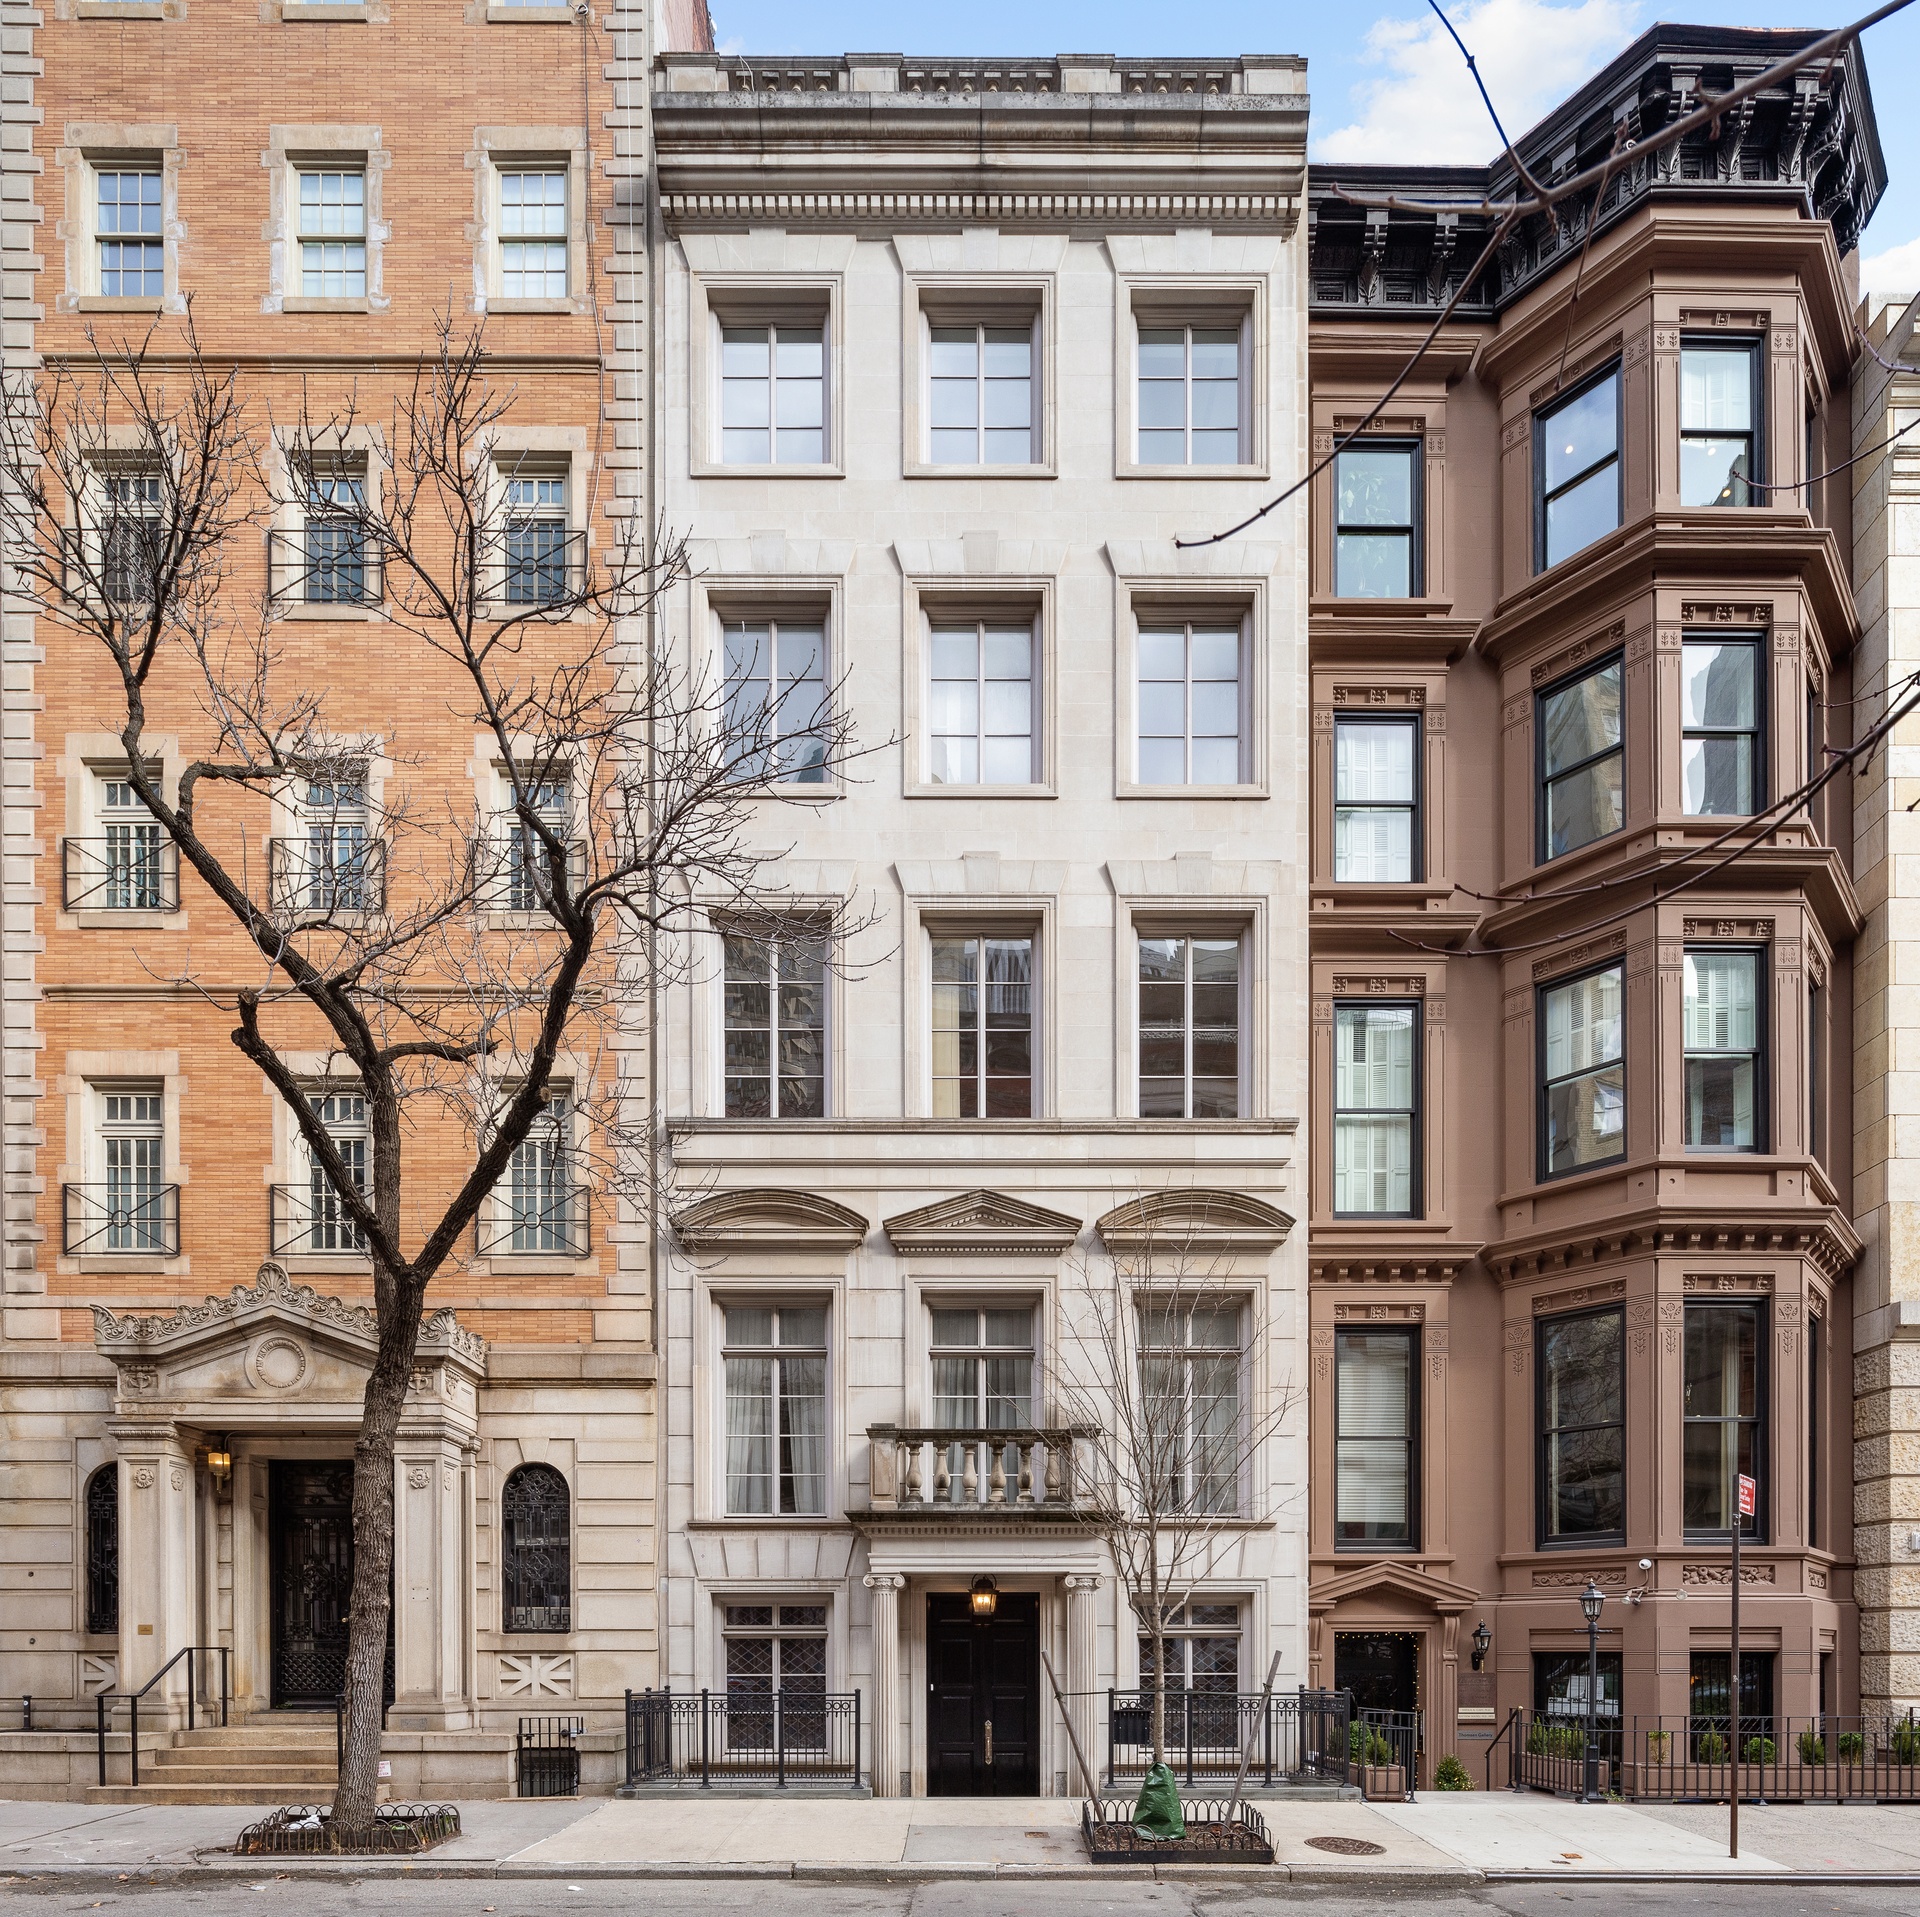 7 East 63rd Street Thouse, Upper East Side, Upper East Side, NYC - 7 Bedrooms  6.5 Bathrooms  20 Rooms - 